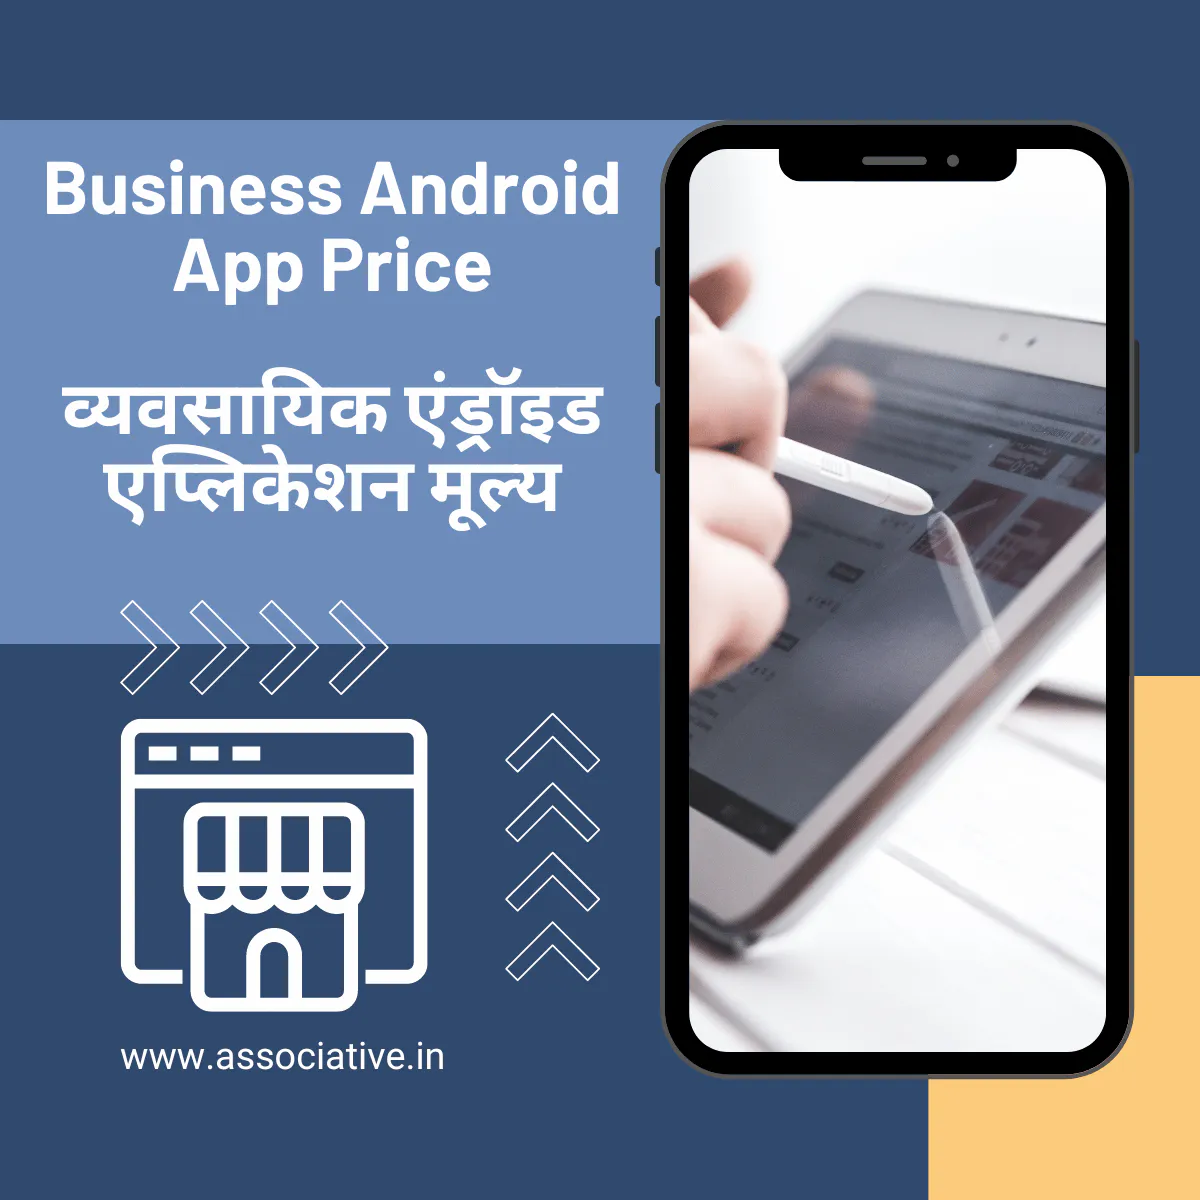 Business Android App